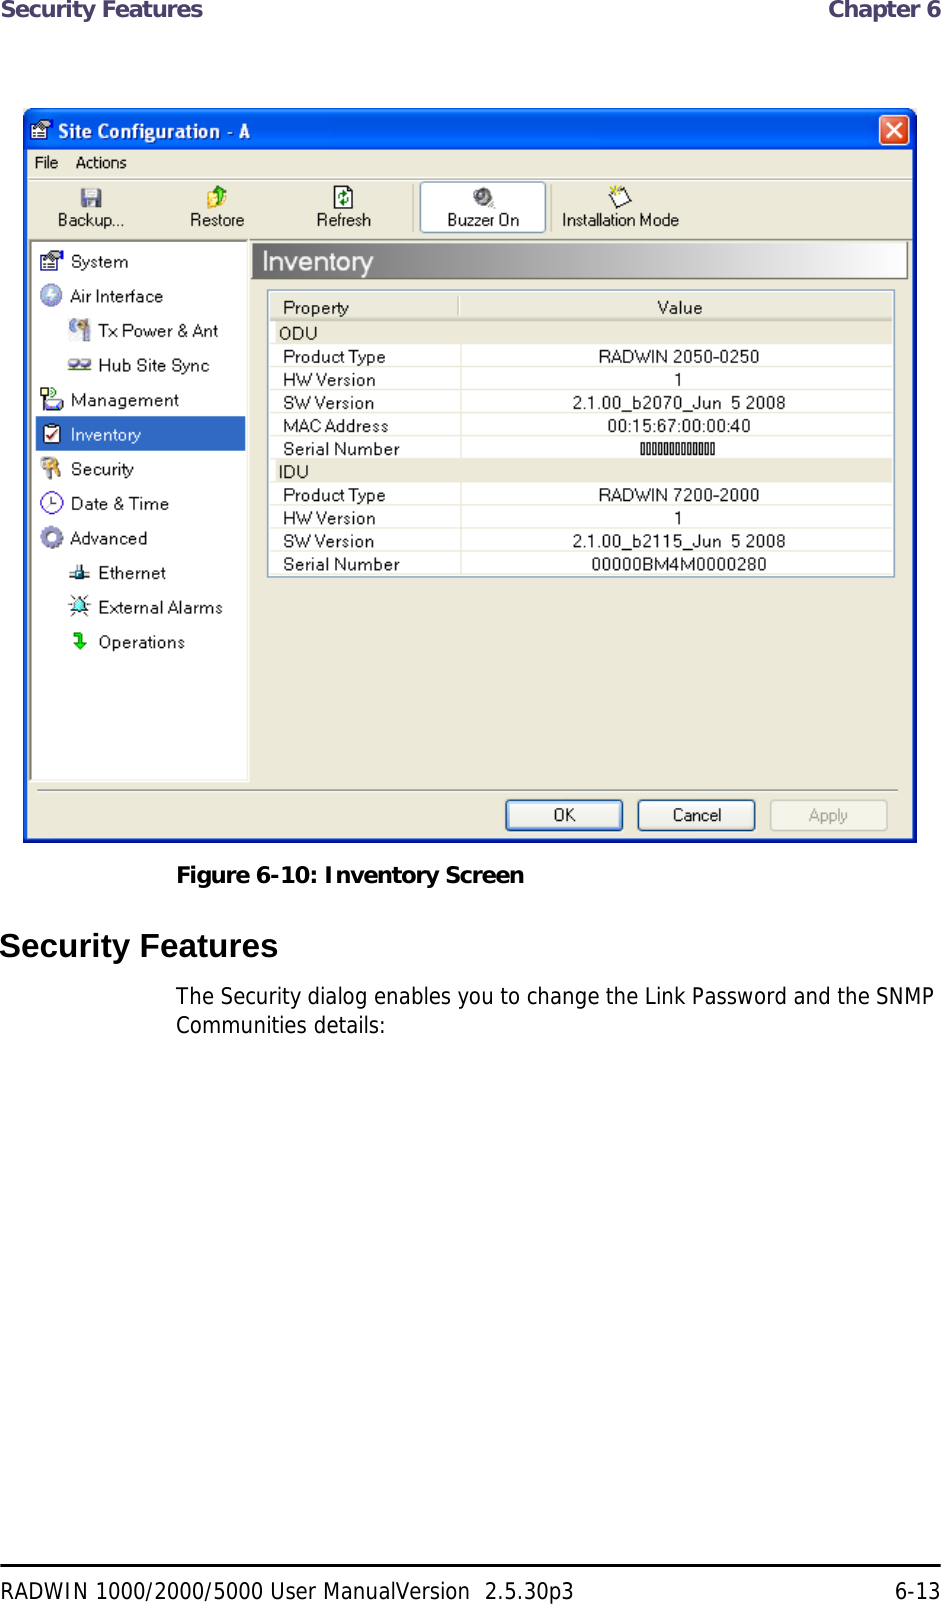 Security Features  Chapter 6RADWIN 1000/2000/5000 User ManualVersion  2.5.30p3 6-13Figure 6-10: Inventory ScreenSecurity FeaturesThe Security dialog enables you to change the Link Password and the SNMP Communities details: